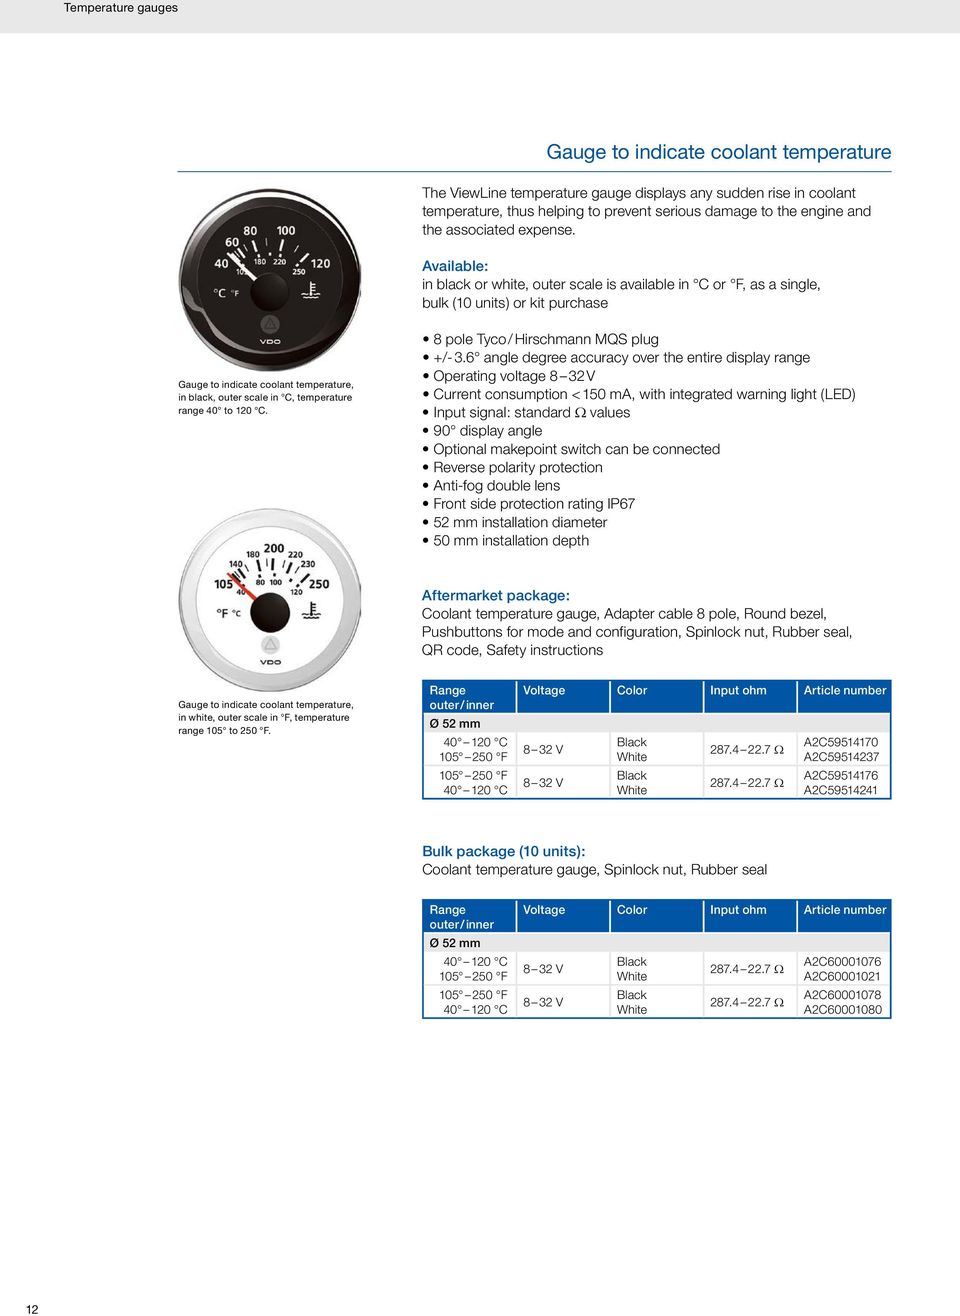 Available: in black or white, outer scale is available in C or F, as a single, bulk (10 units) or kit purchase Gauge to indicate coolant temperature, in black, outer scale in C, temperature range 40